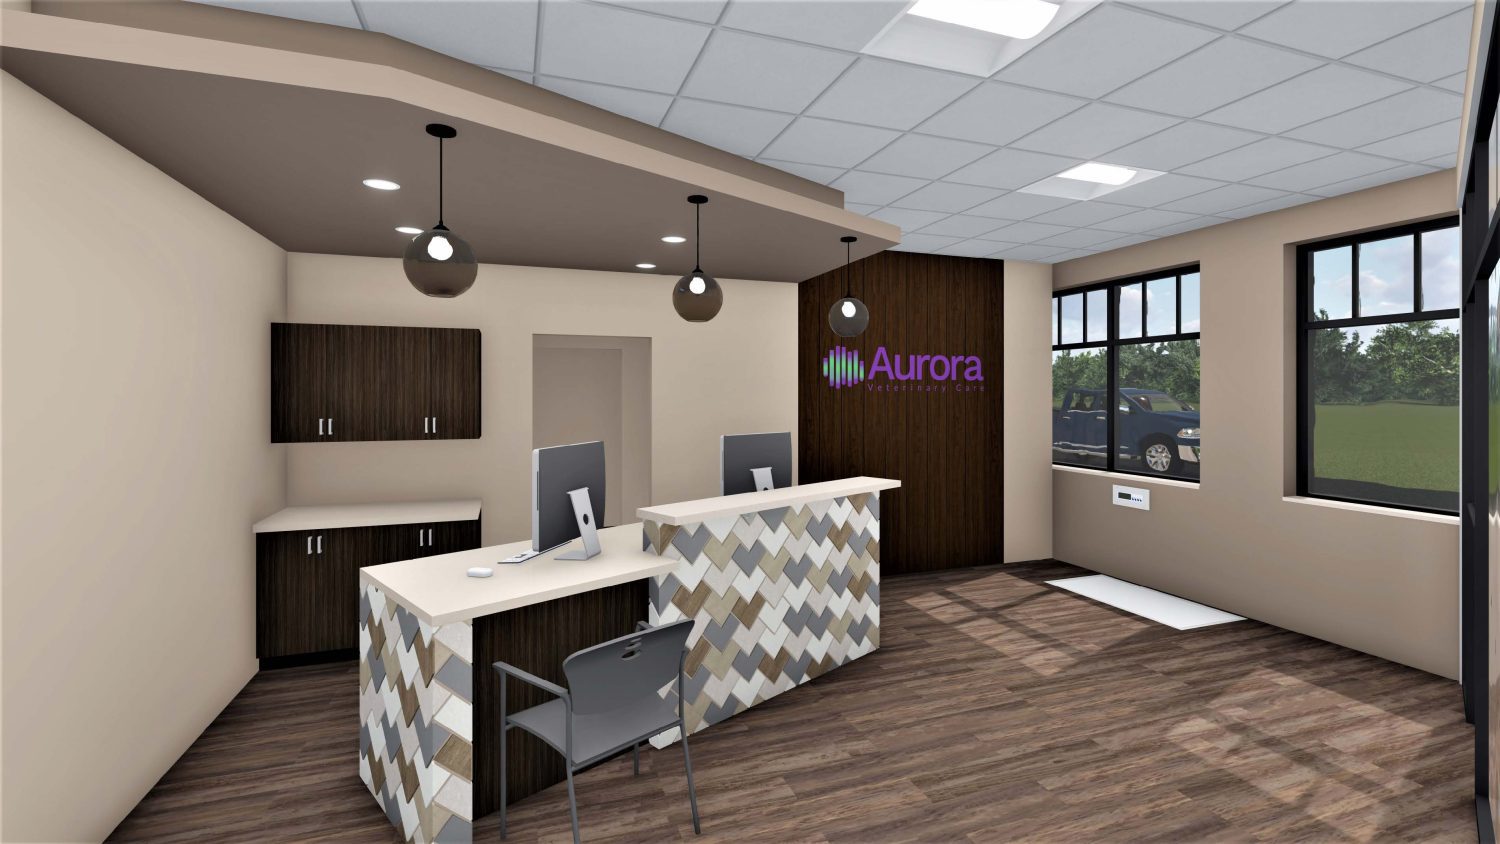 Aurora scaled - Keller, Inc. to Build for Aurora Veterinary Care Clinic